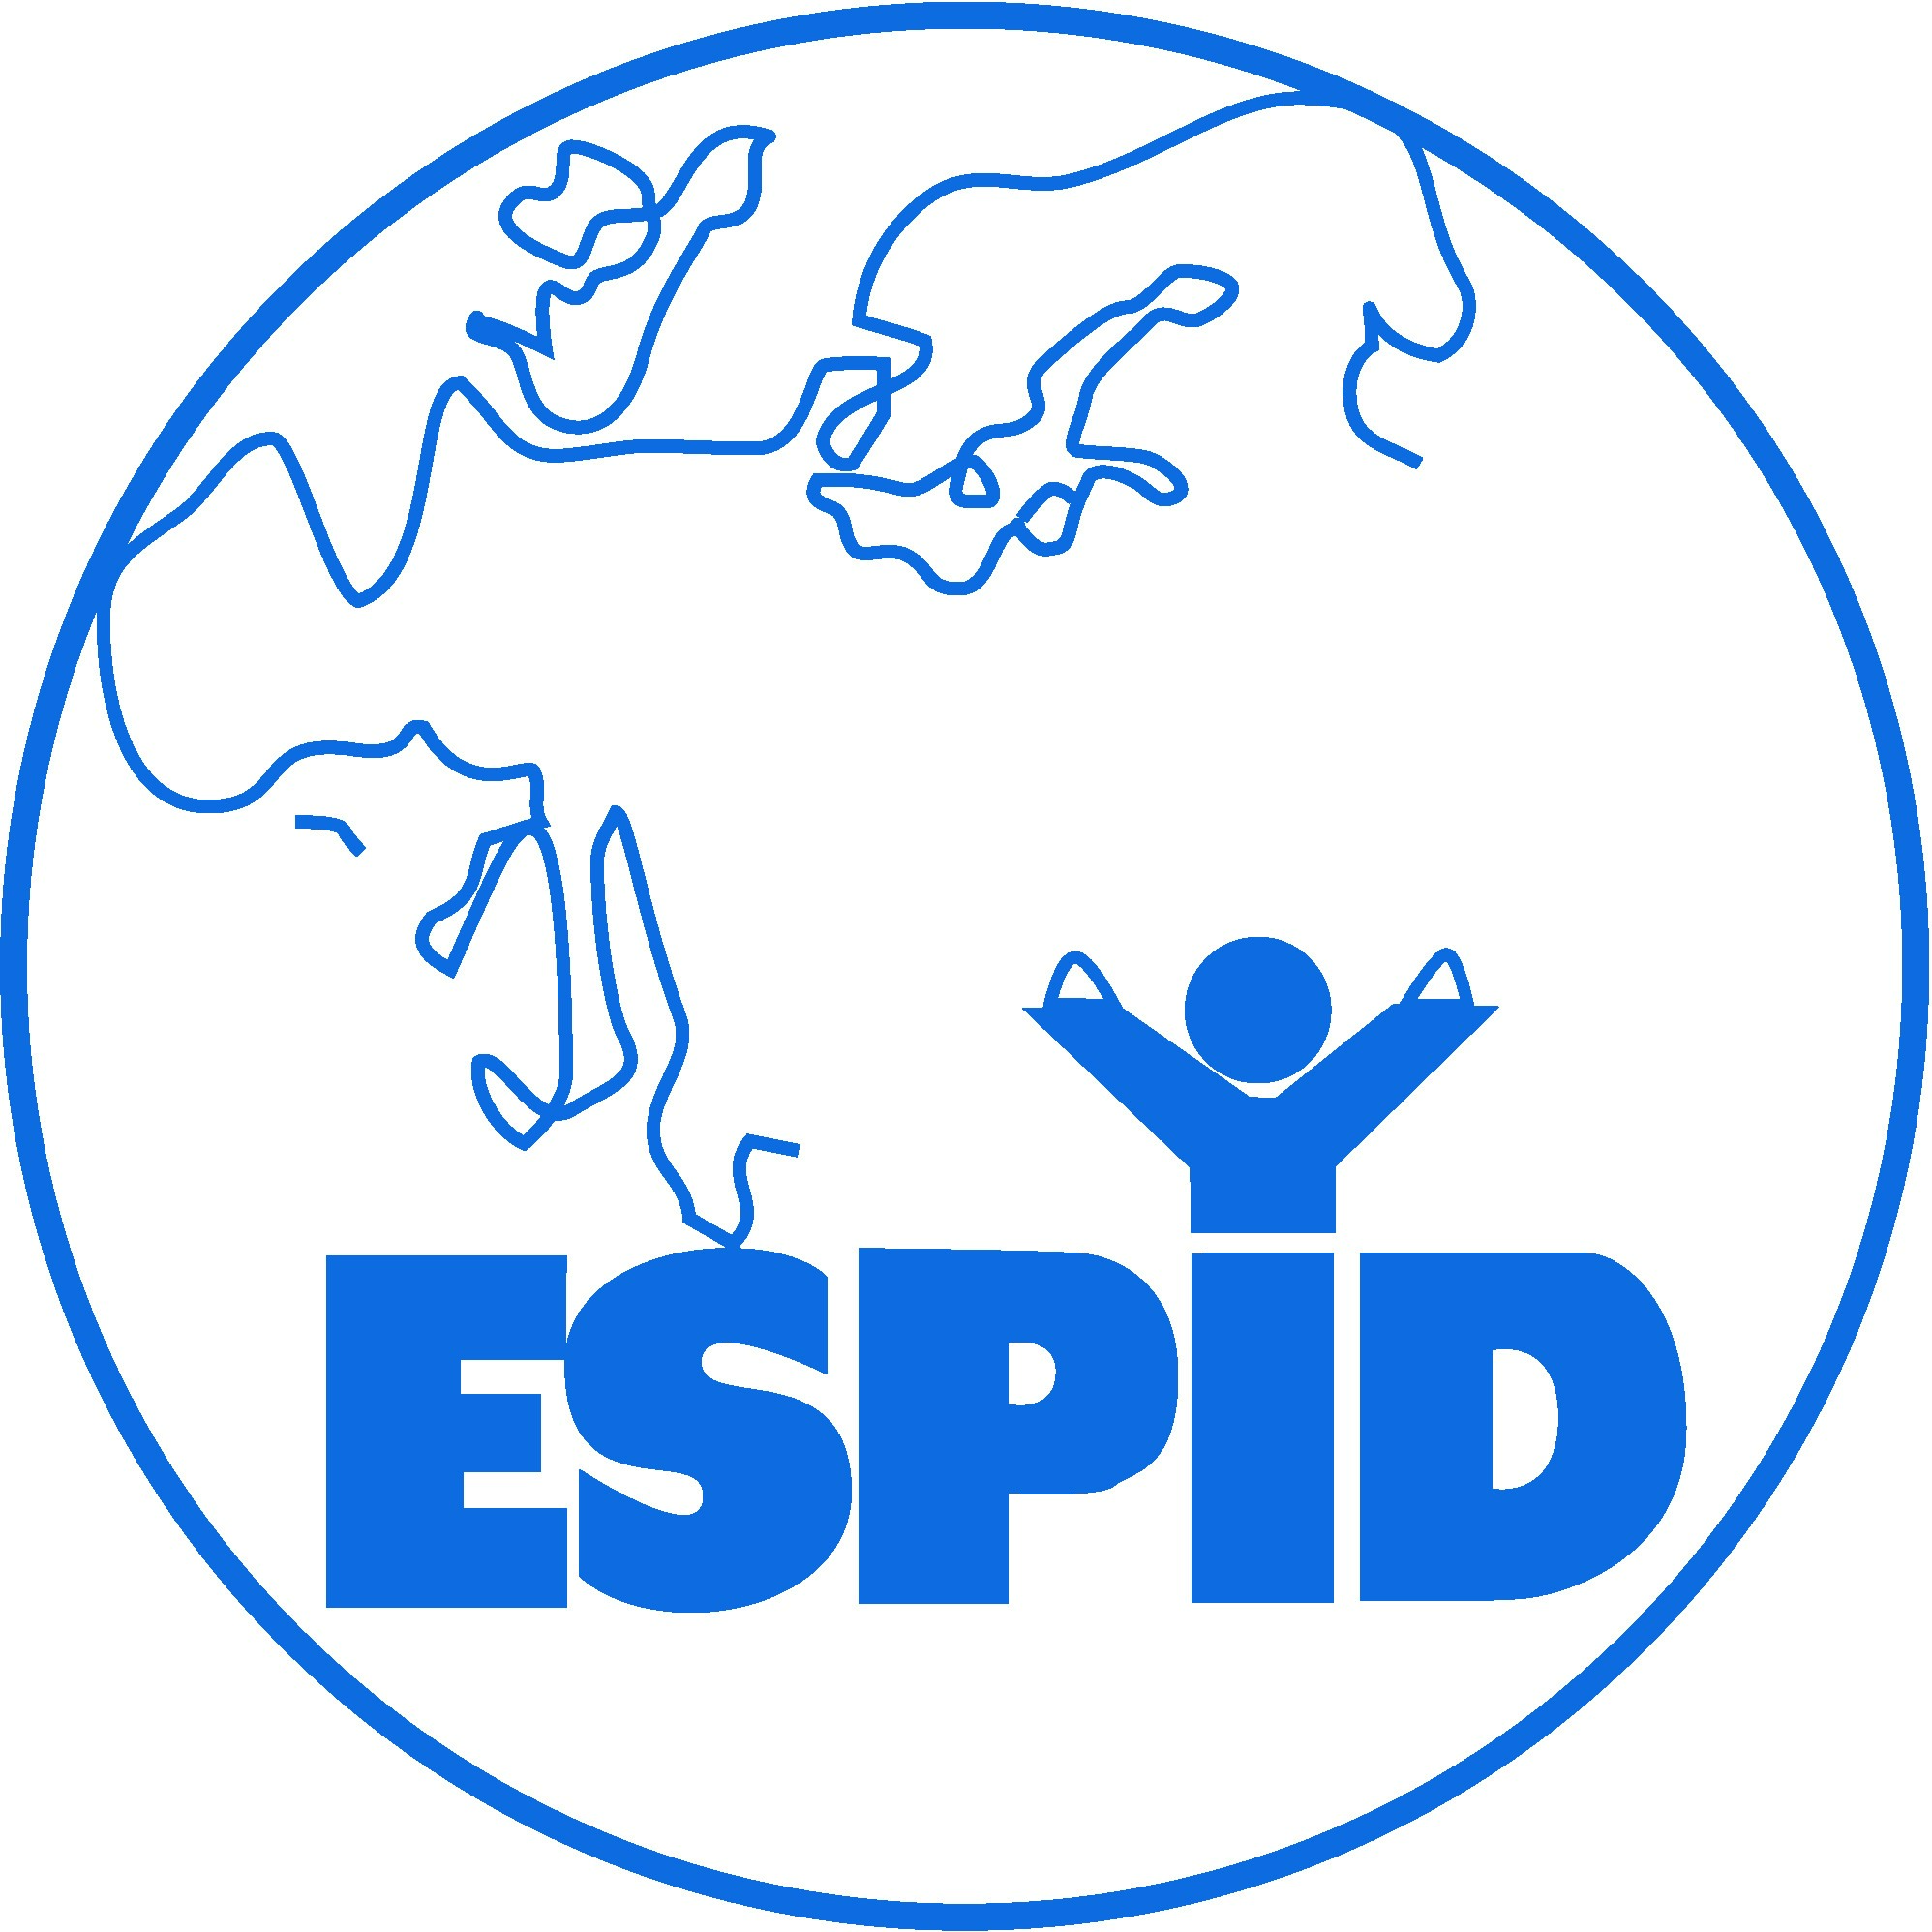 ESPID 2023 - The 41st Meeting of The European Society for Paediatric Infectious Diseases